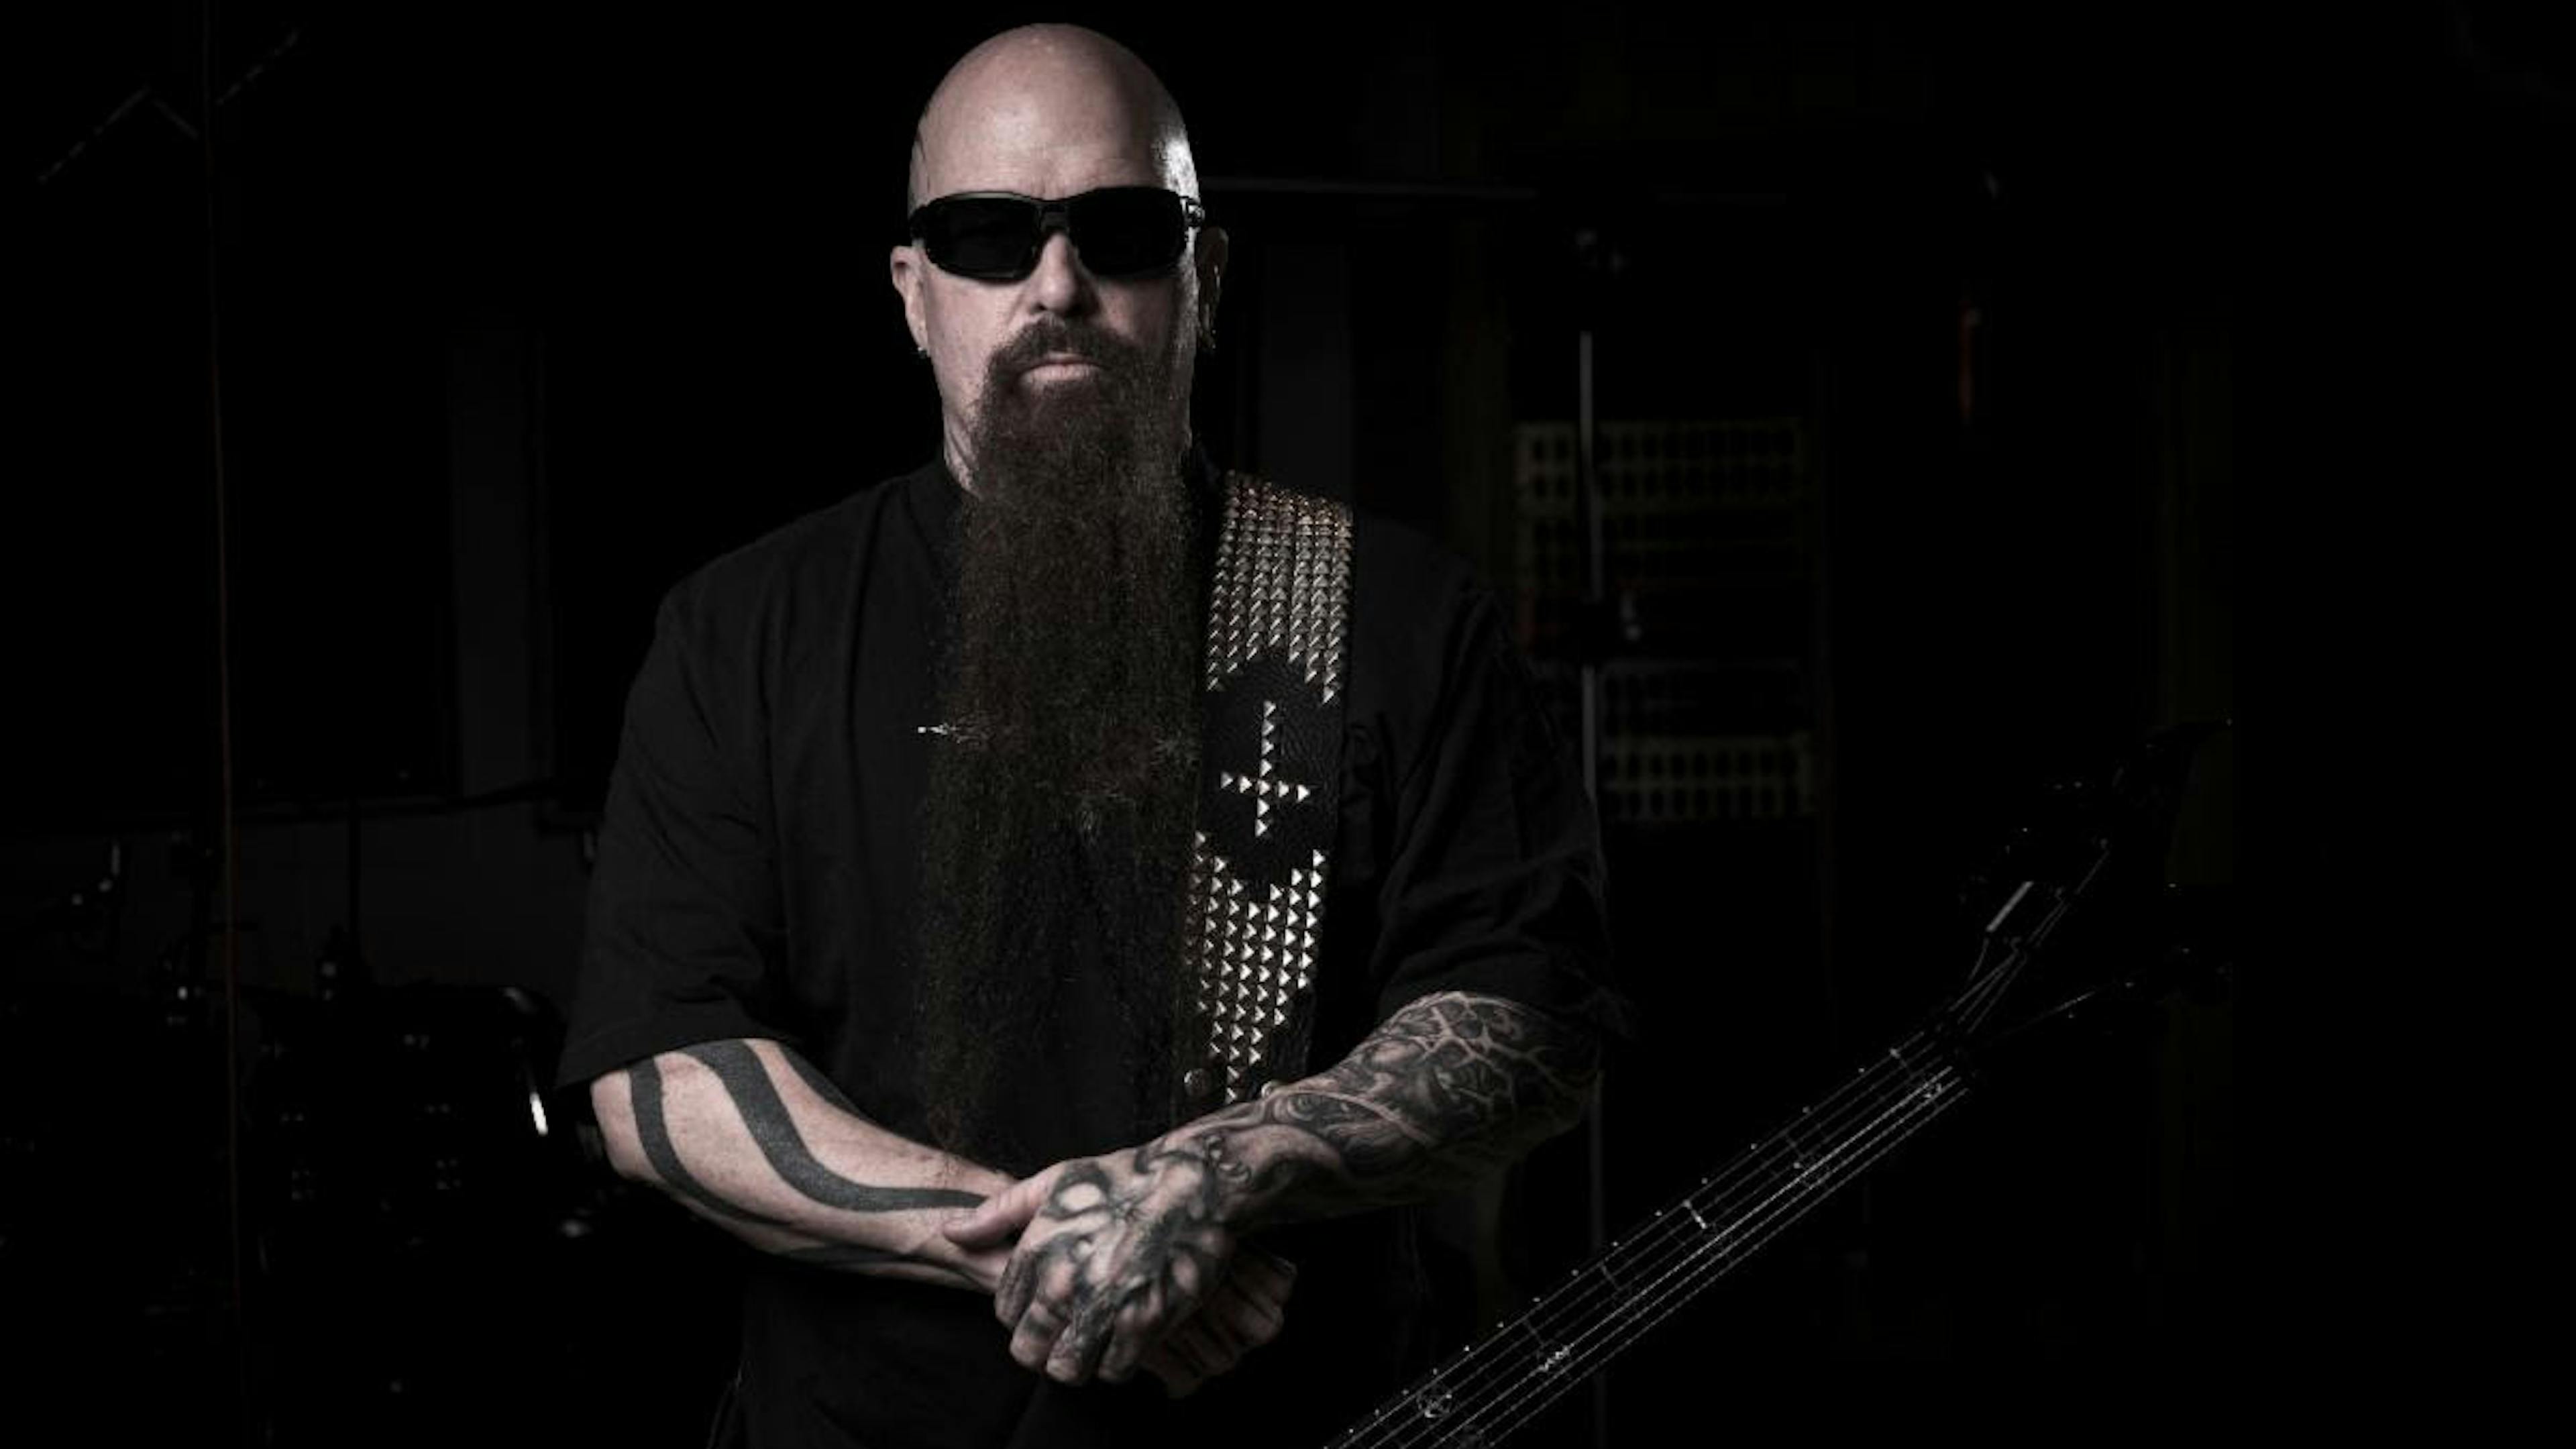 Kerry King: “I’m going to keep going until it physically doesn’t make sense anymore… I hope that’s still a long way away”